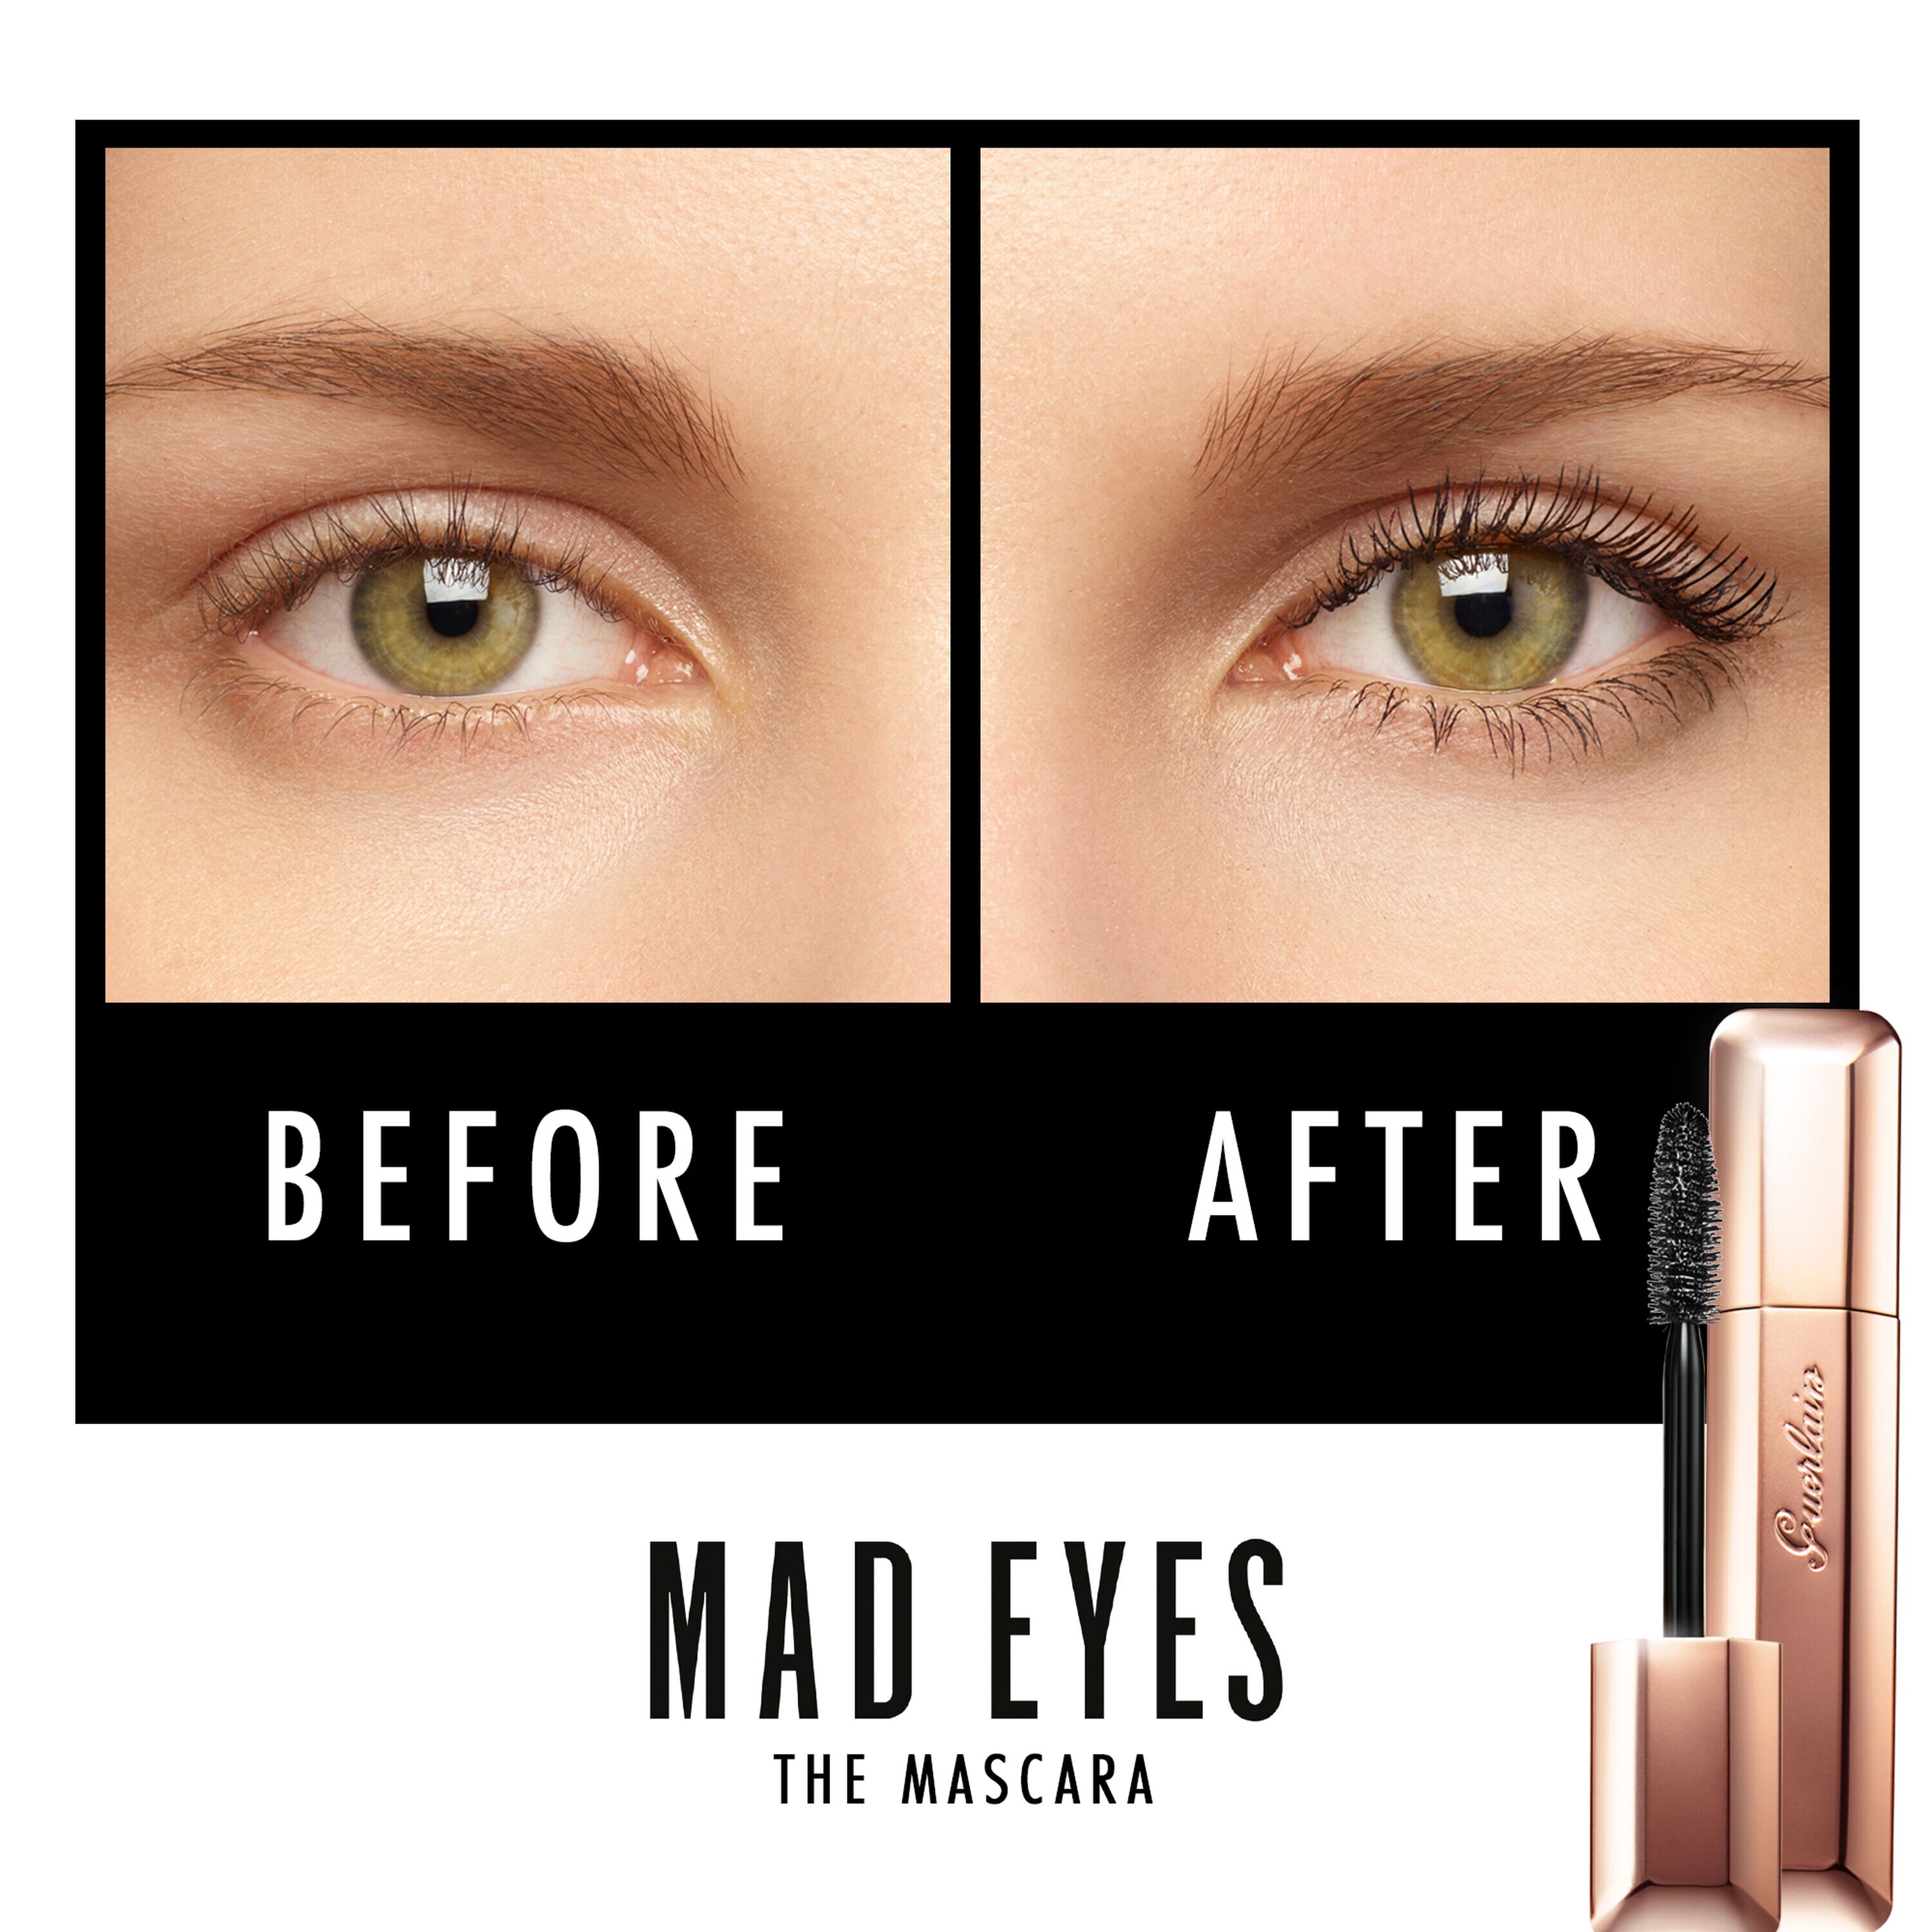 Mascara buildable volume lash by lash (See the picture 3/6)